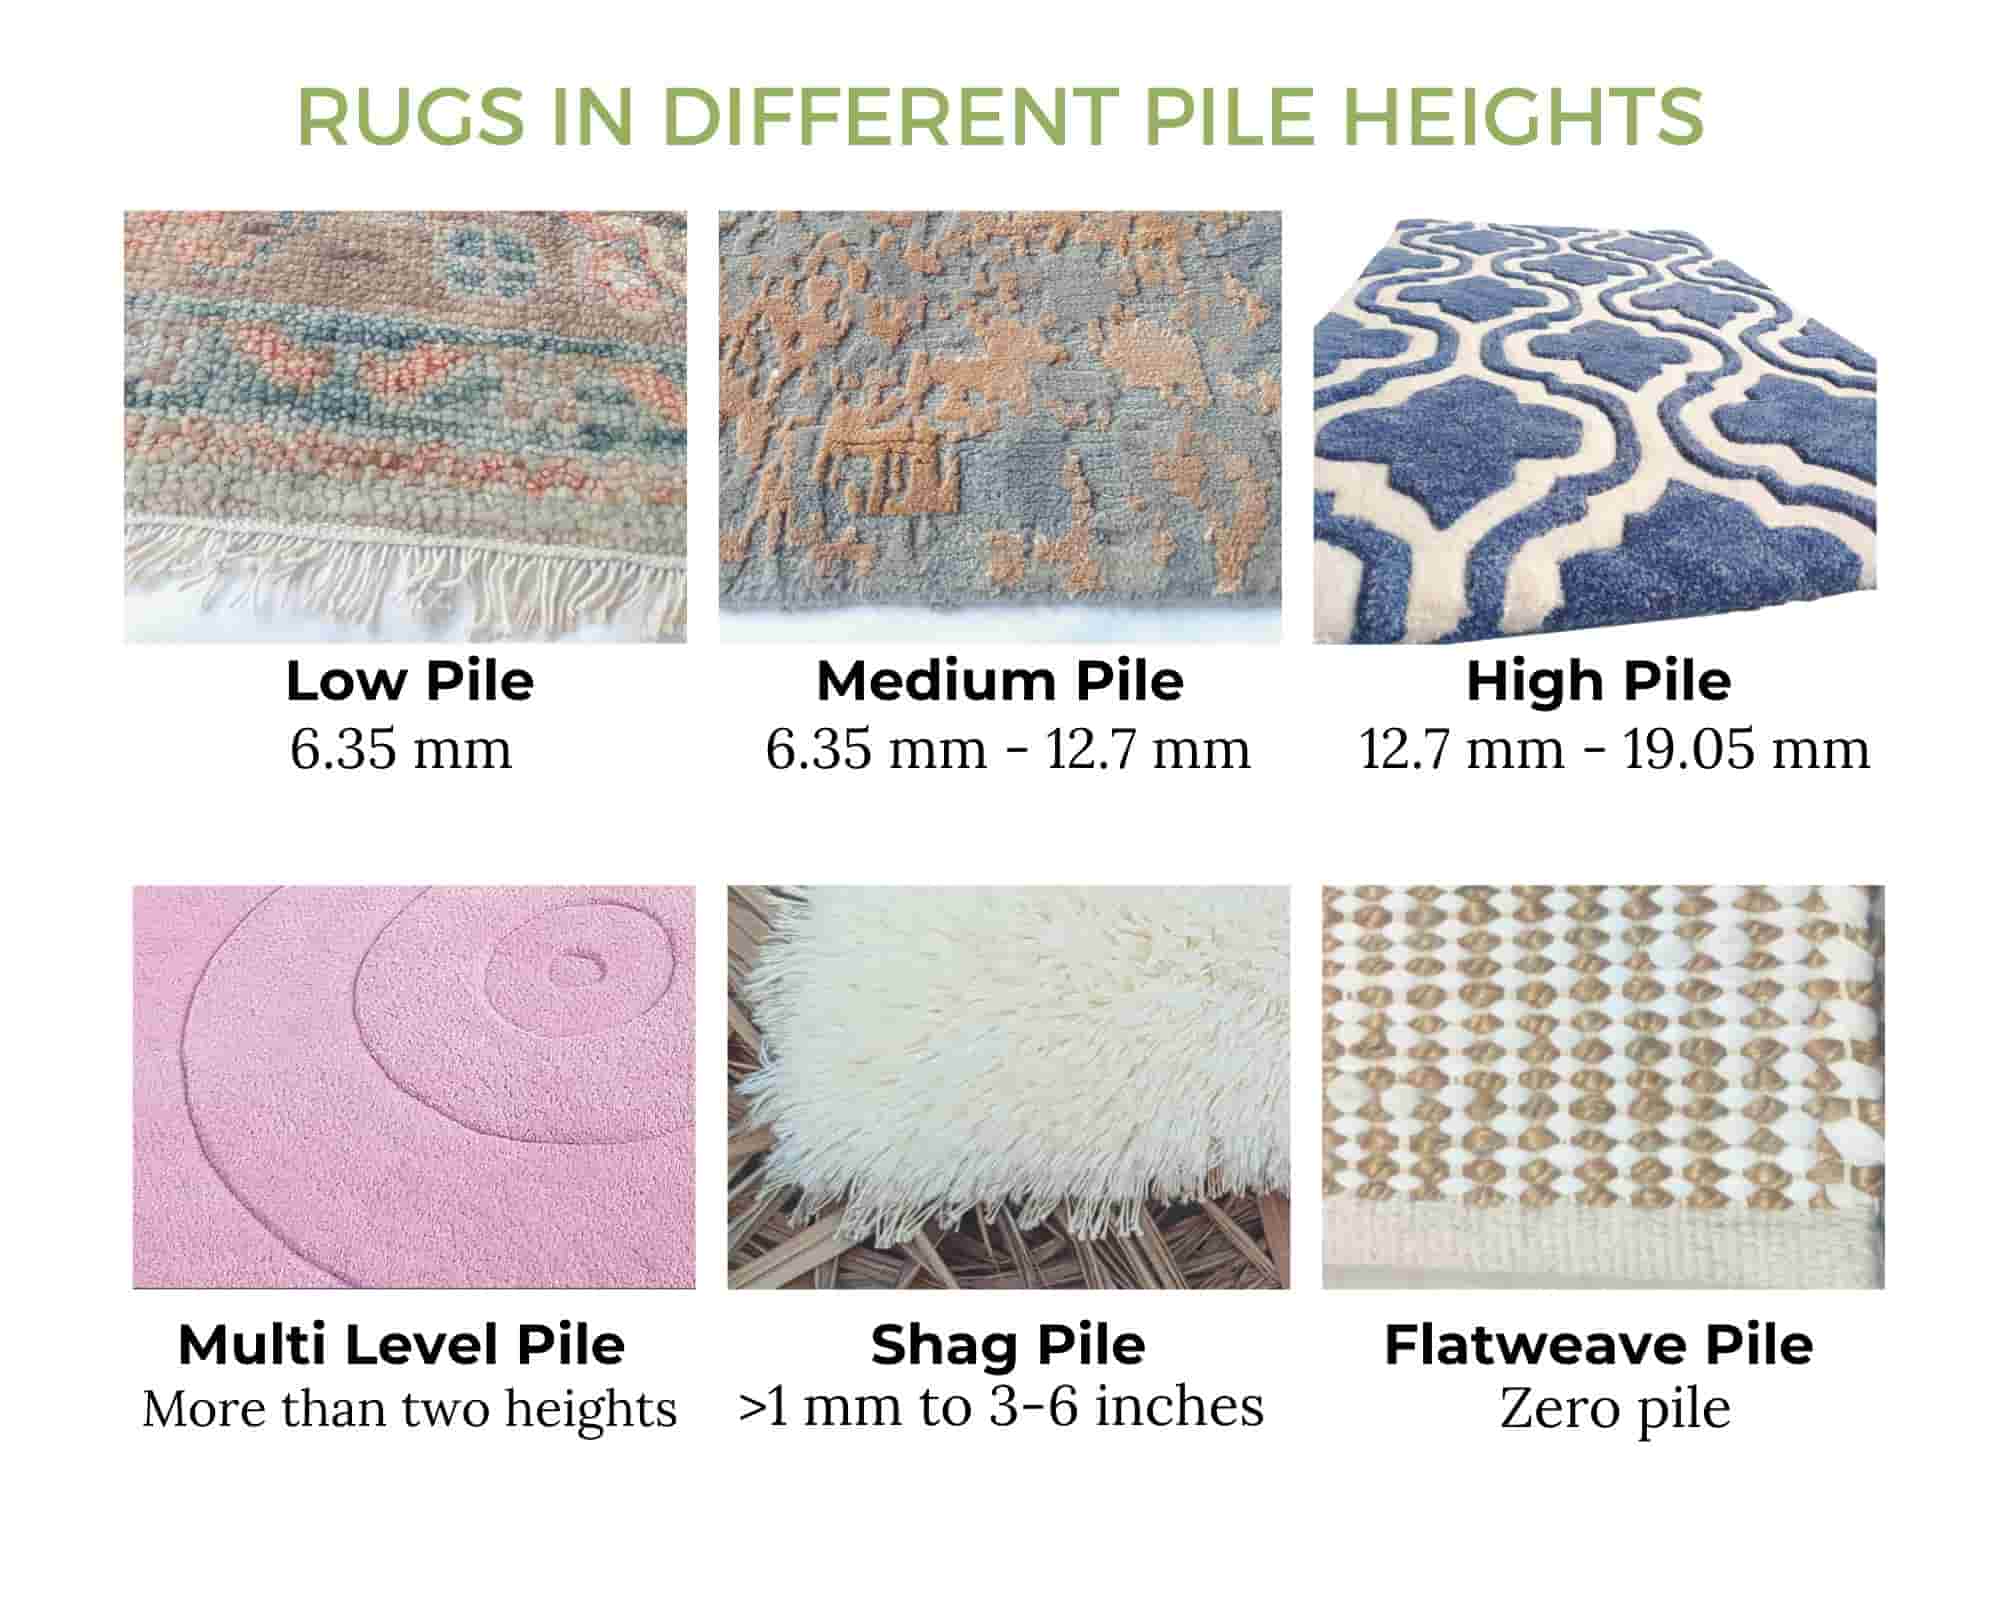 Rug Pile Height Chart - www.inf-inet.com